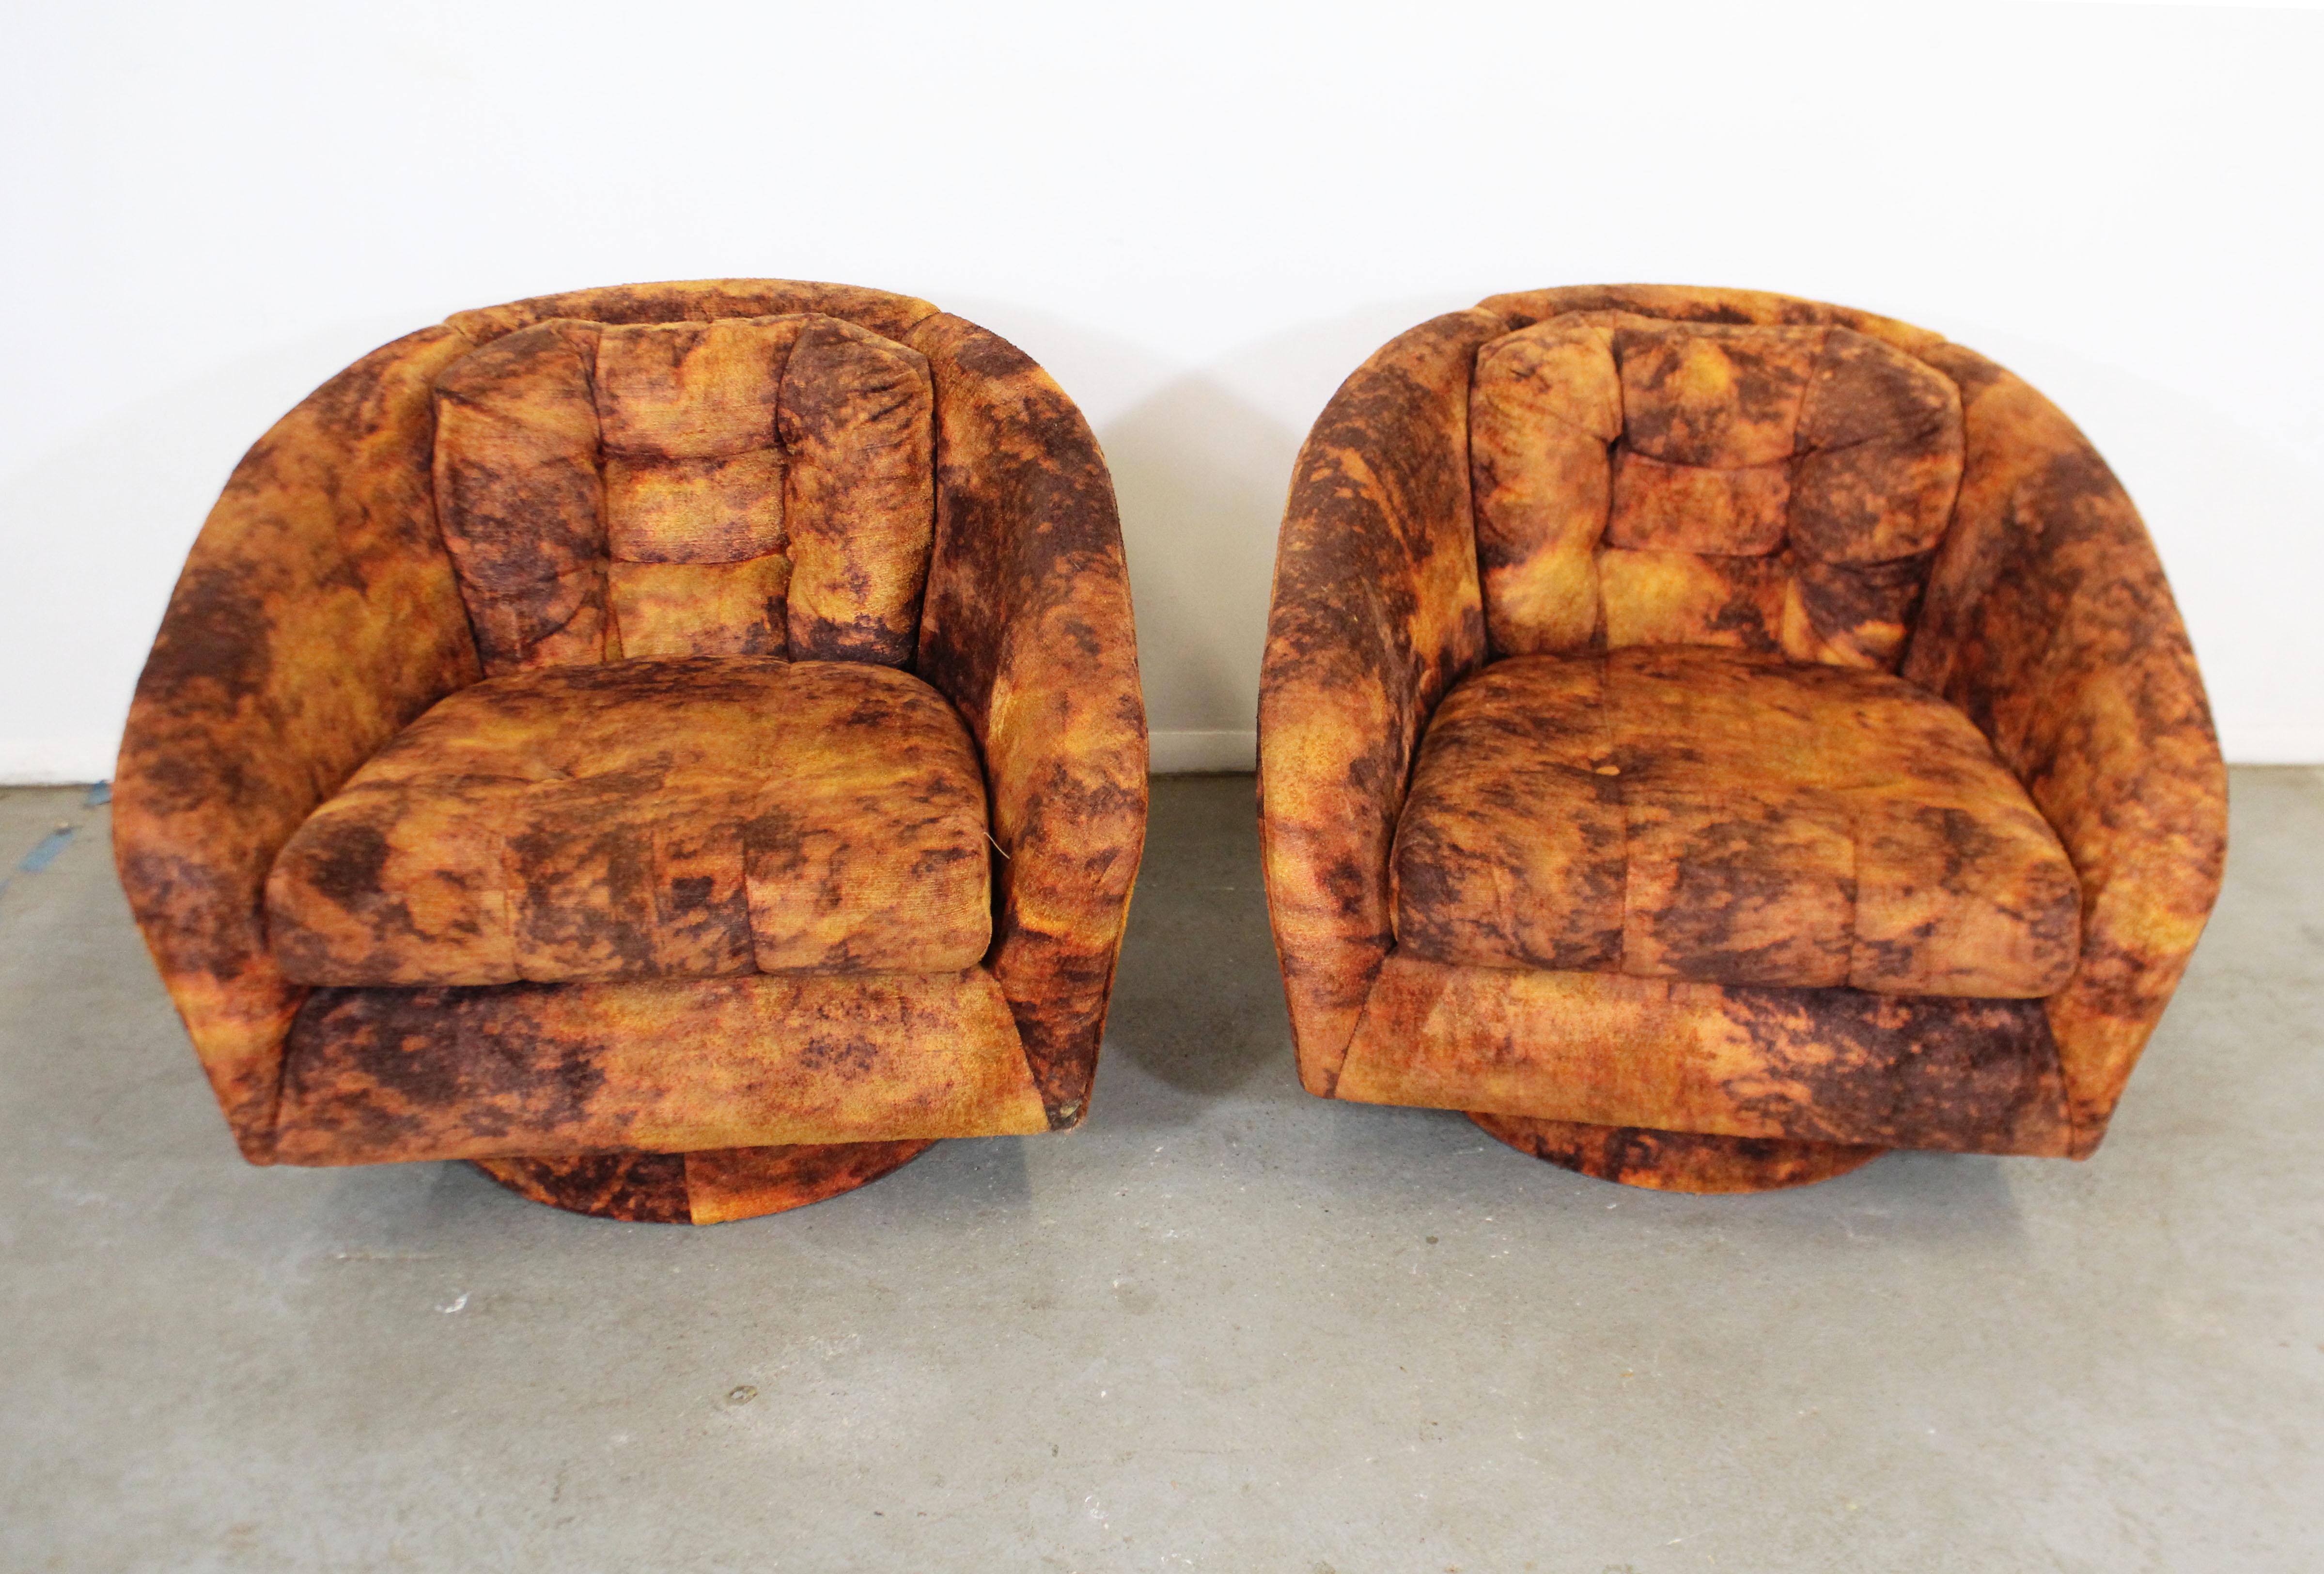 What a find. Offered is a pair of vintage Mid-Century Modern swivel chairs with groovy crushed velvet upholstery. These chairs scream quintessential Mid-Century Modern! They are in good condition for their age with some wear on the upholstery. Can